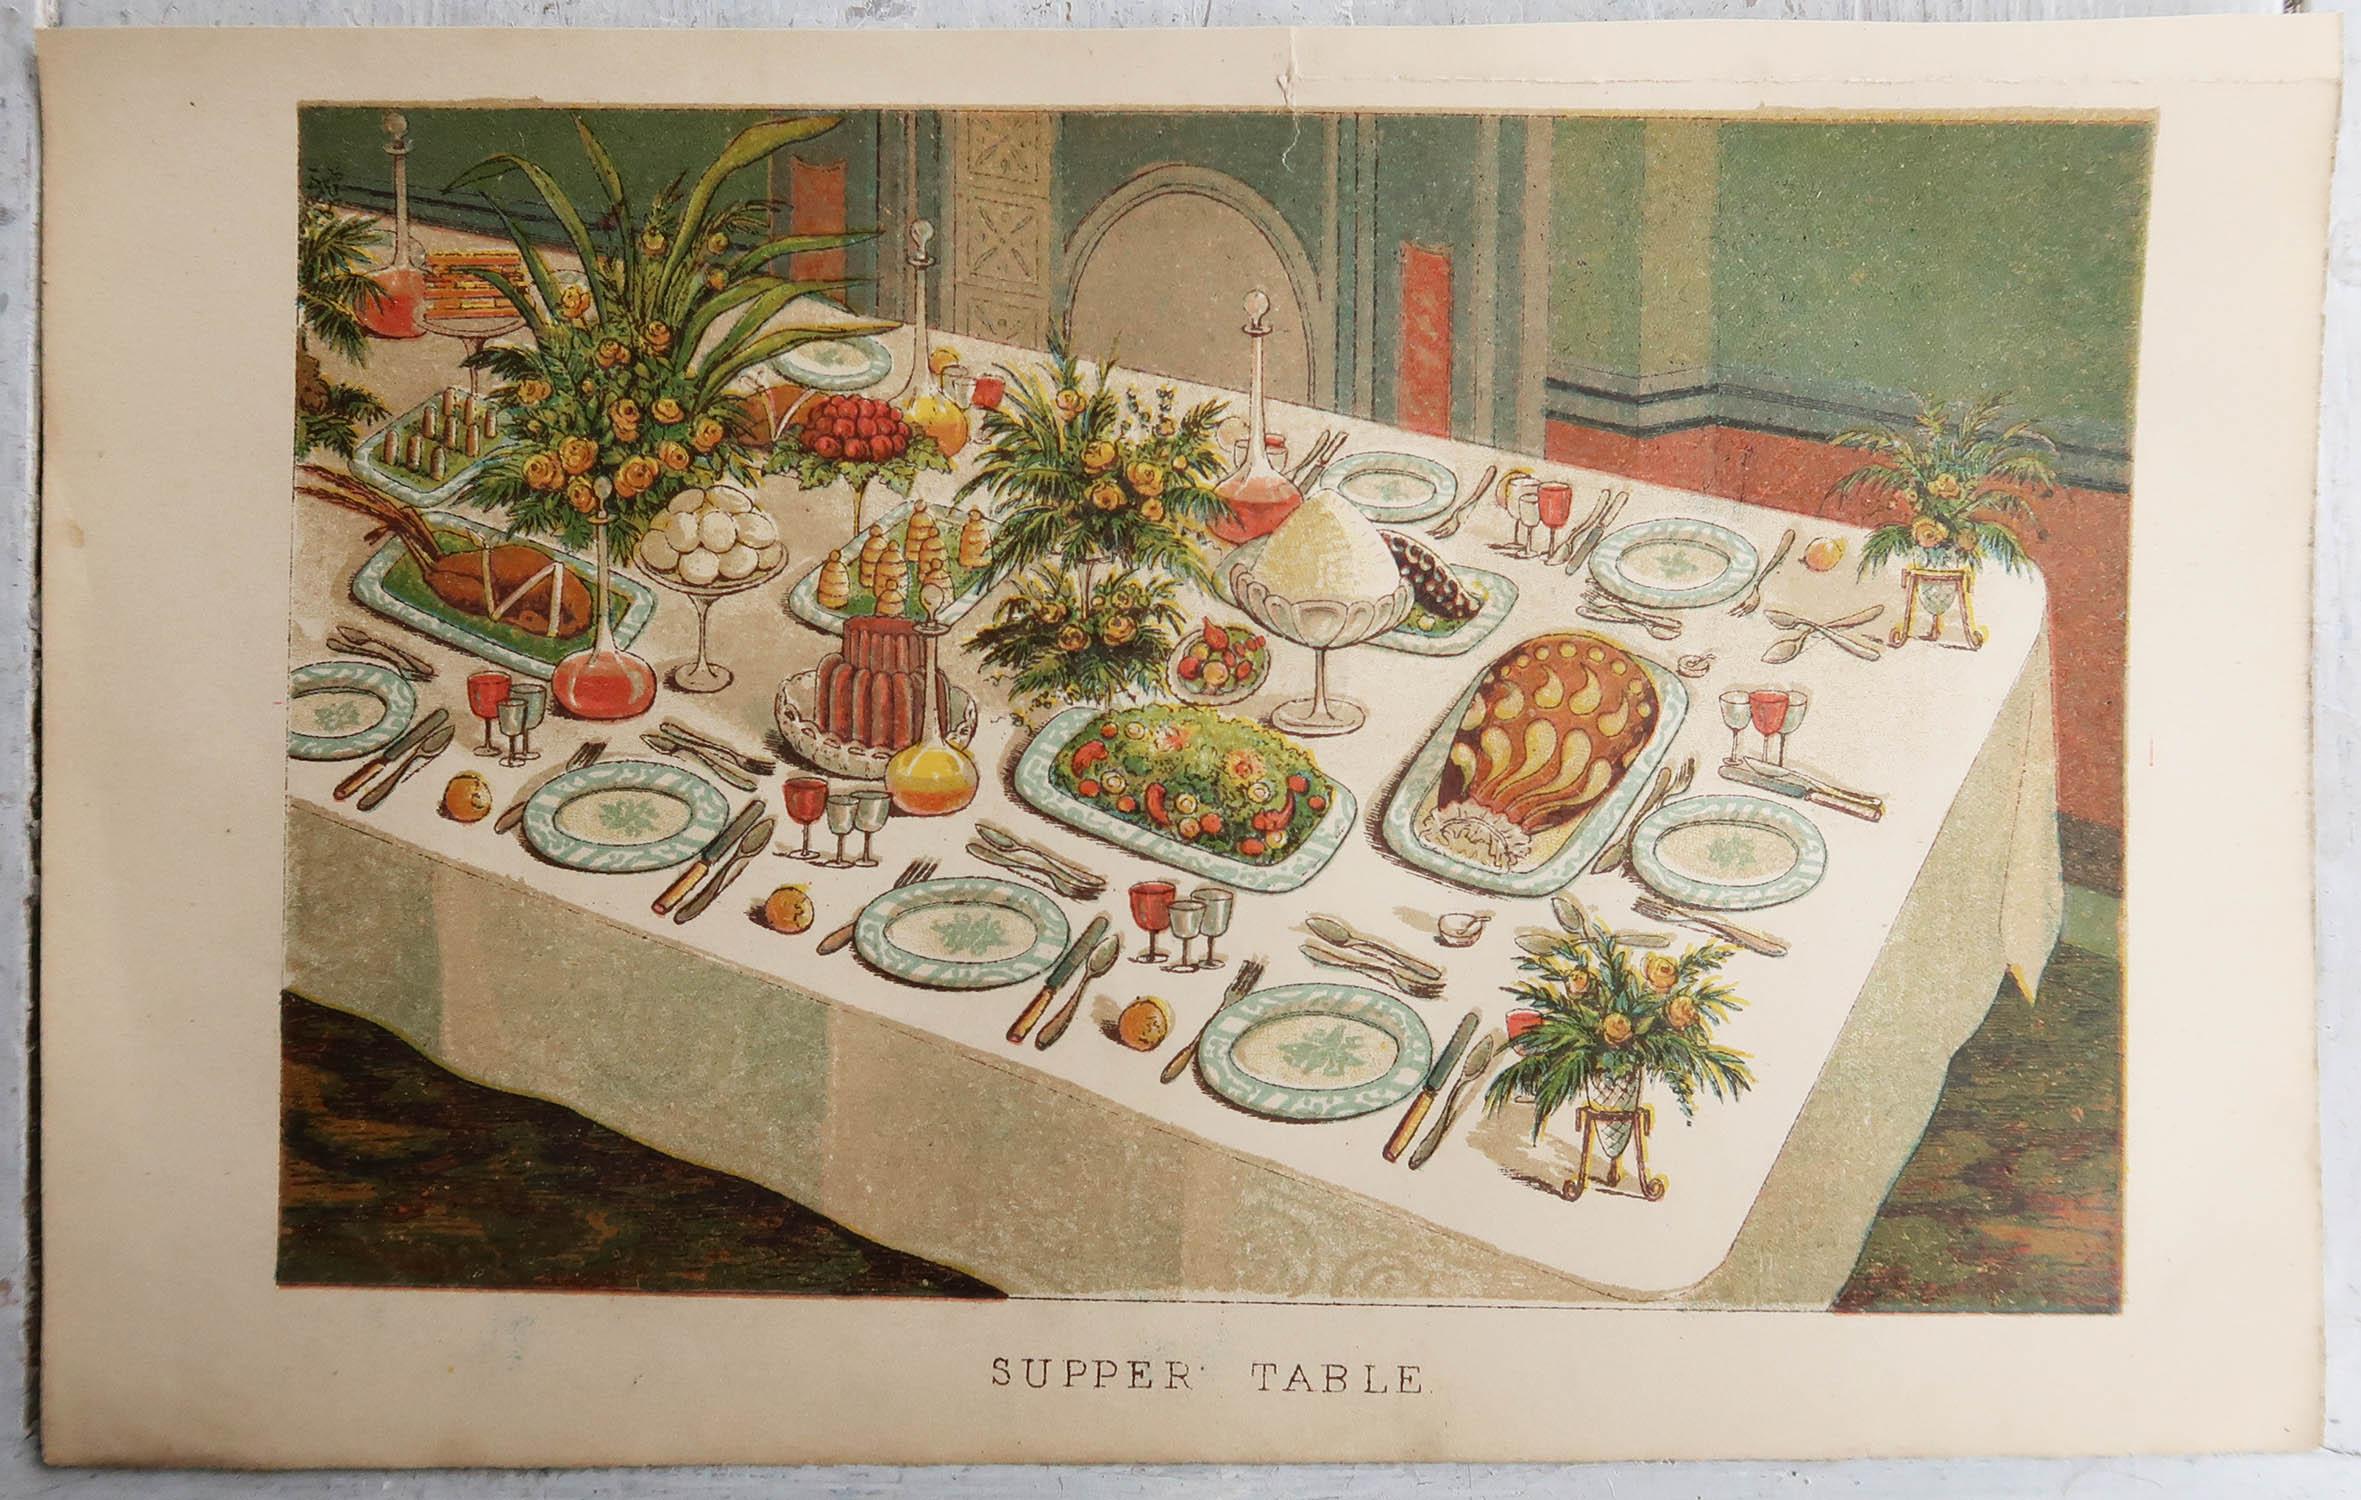 English Original Antique Food Related / Cookery / Dining Print, circa 1890